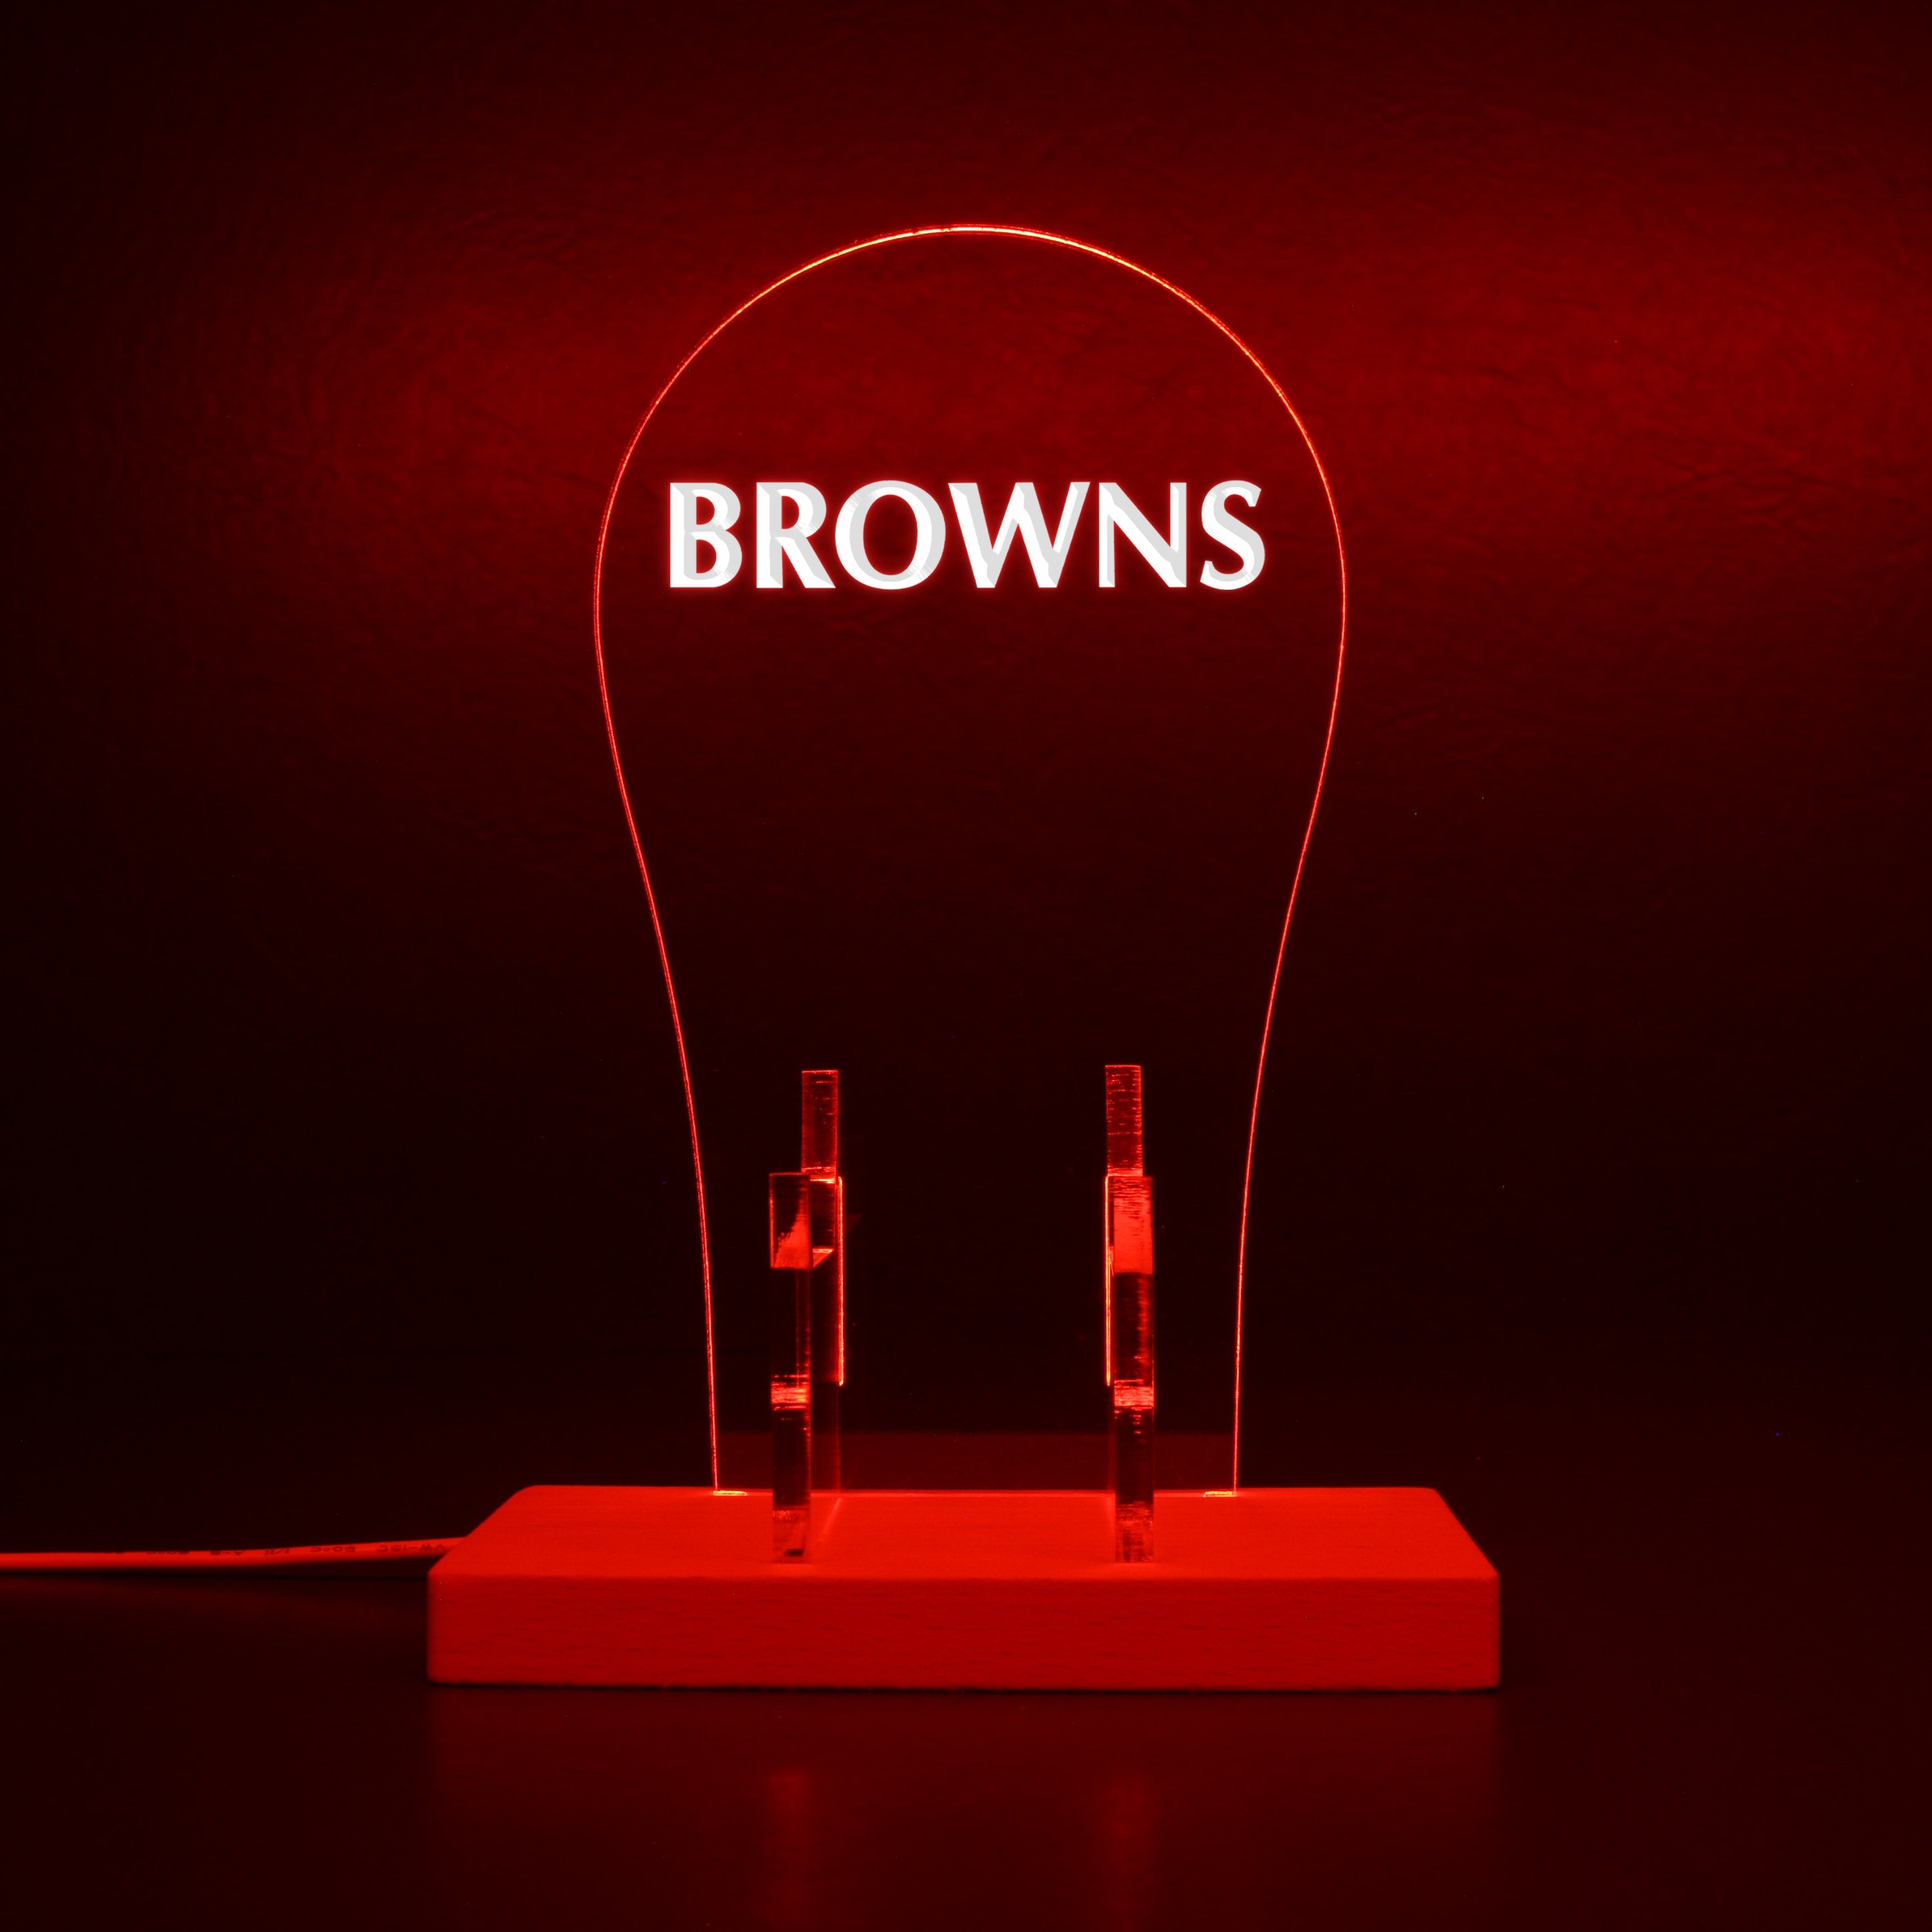 Cleveland Browns script logo in use from 1975-1995 RGB LED Gaming Headset Controller Stand